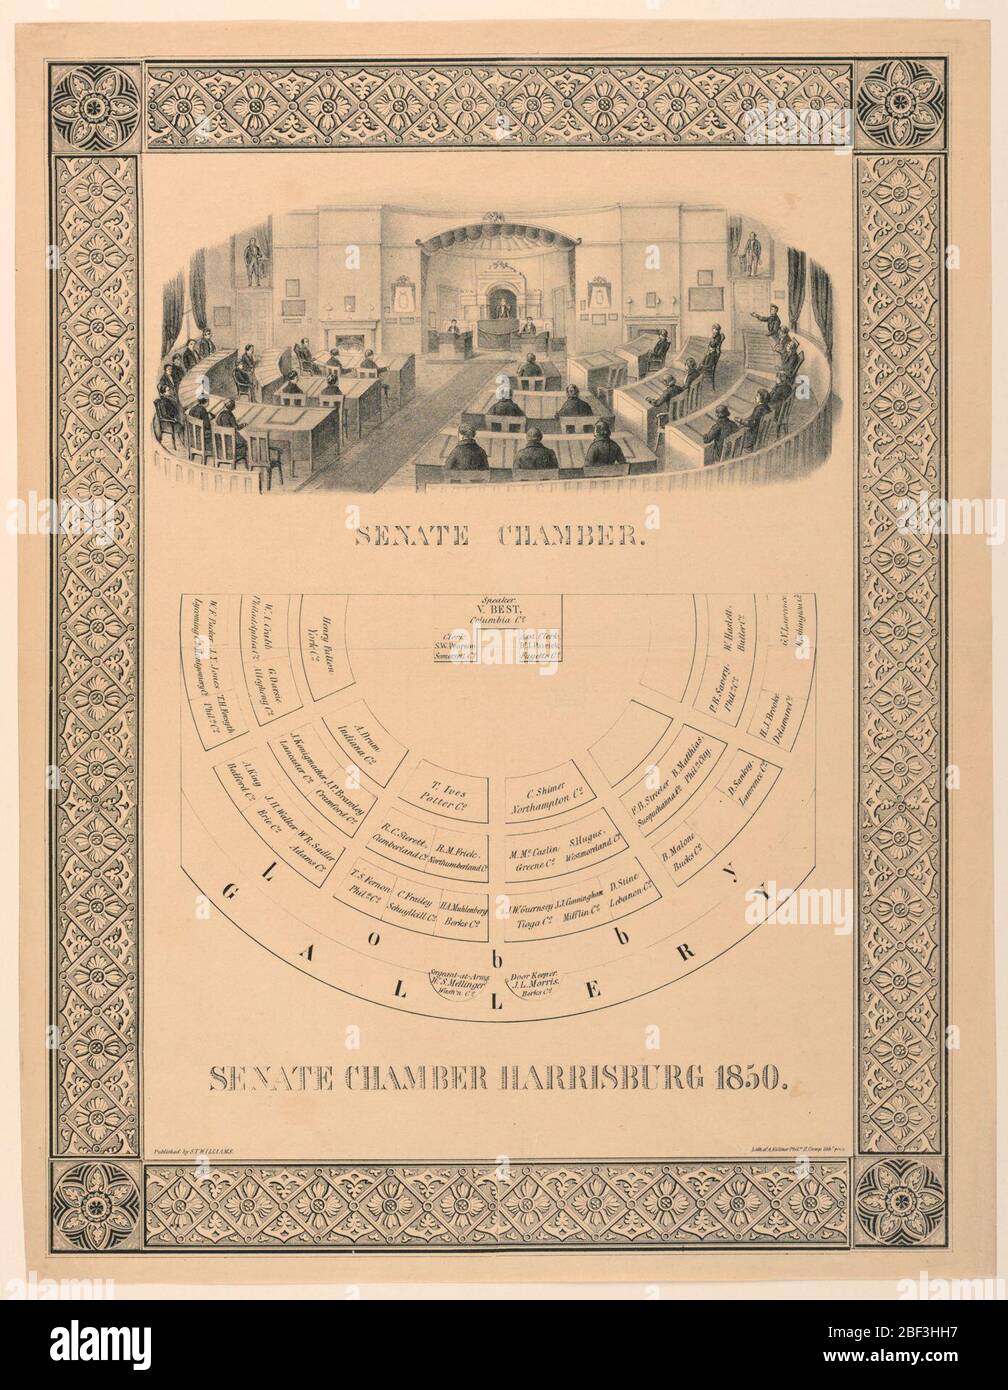 Senate Chamber Harrisbug Pennsylvannia. Vertical rectangle. Vignette of Senate Chamber interior, looking toward the Speaker's podium. Below: plan of the chamber, with names of members indicated. Caption: 'Senate Chamber Harrisburg 1850.' Enclosed in ornamental frame. Lower left: 'Pubished by S.T. Stock Photo